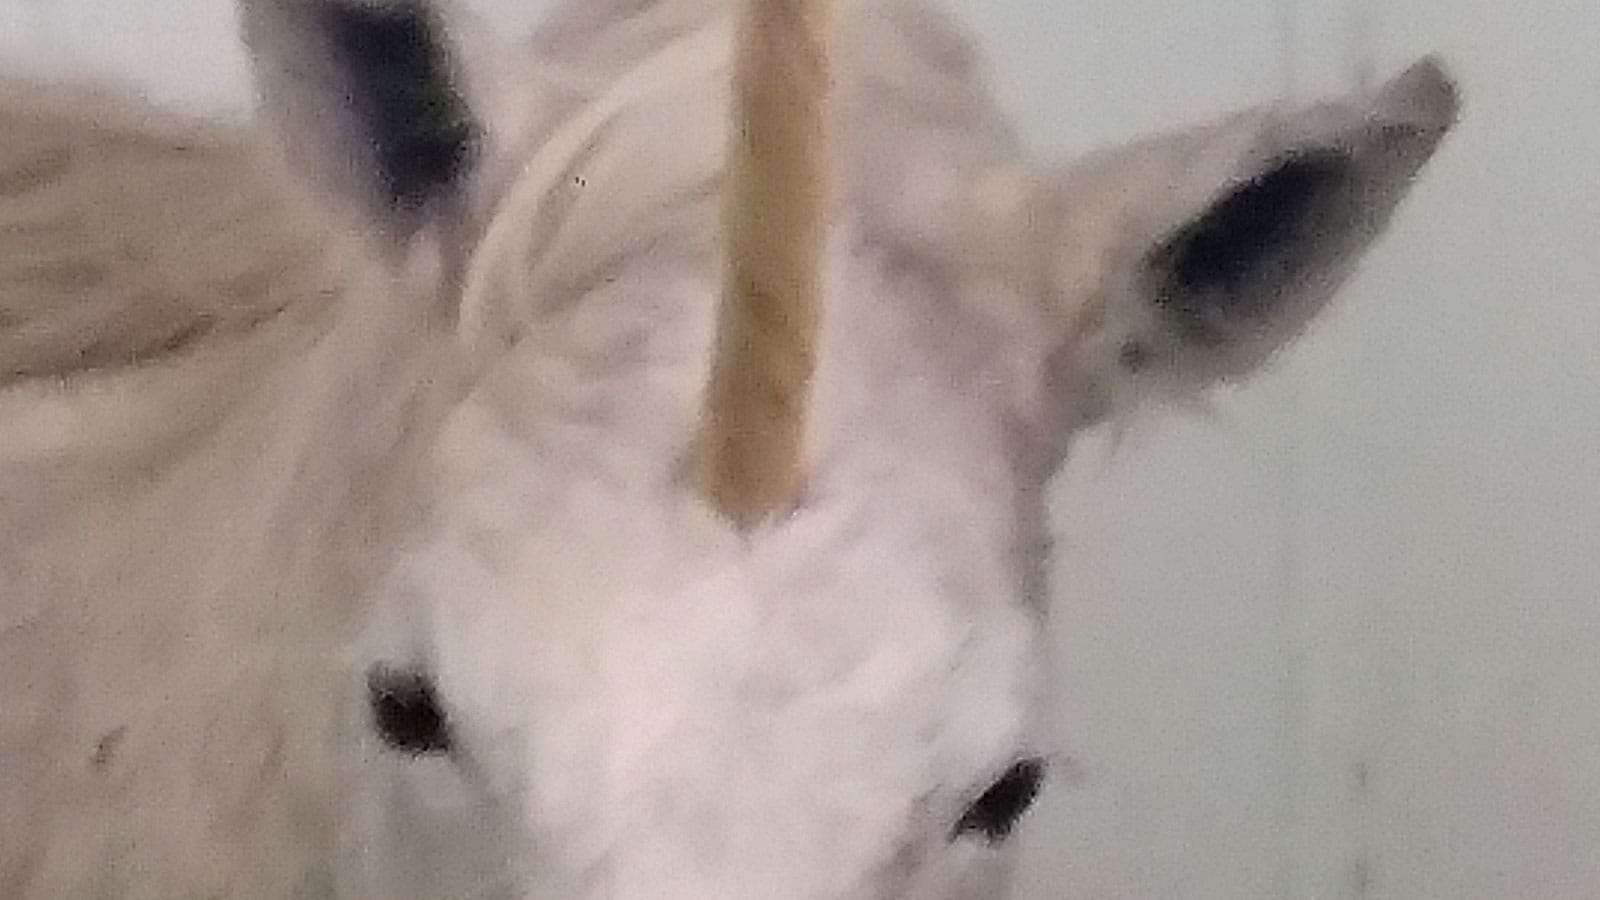 A thoughtful unicorn peers coquettishly over the lower edge of the image